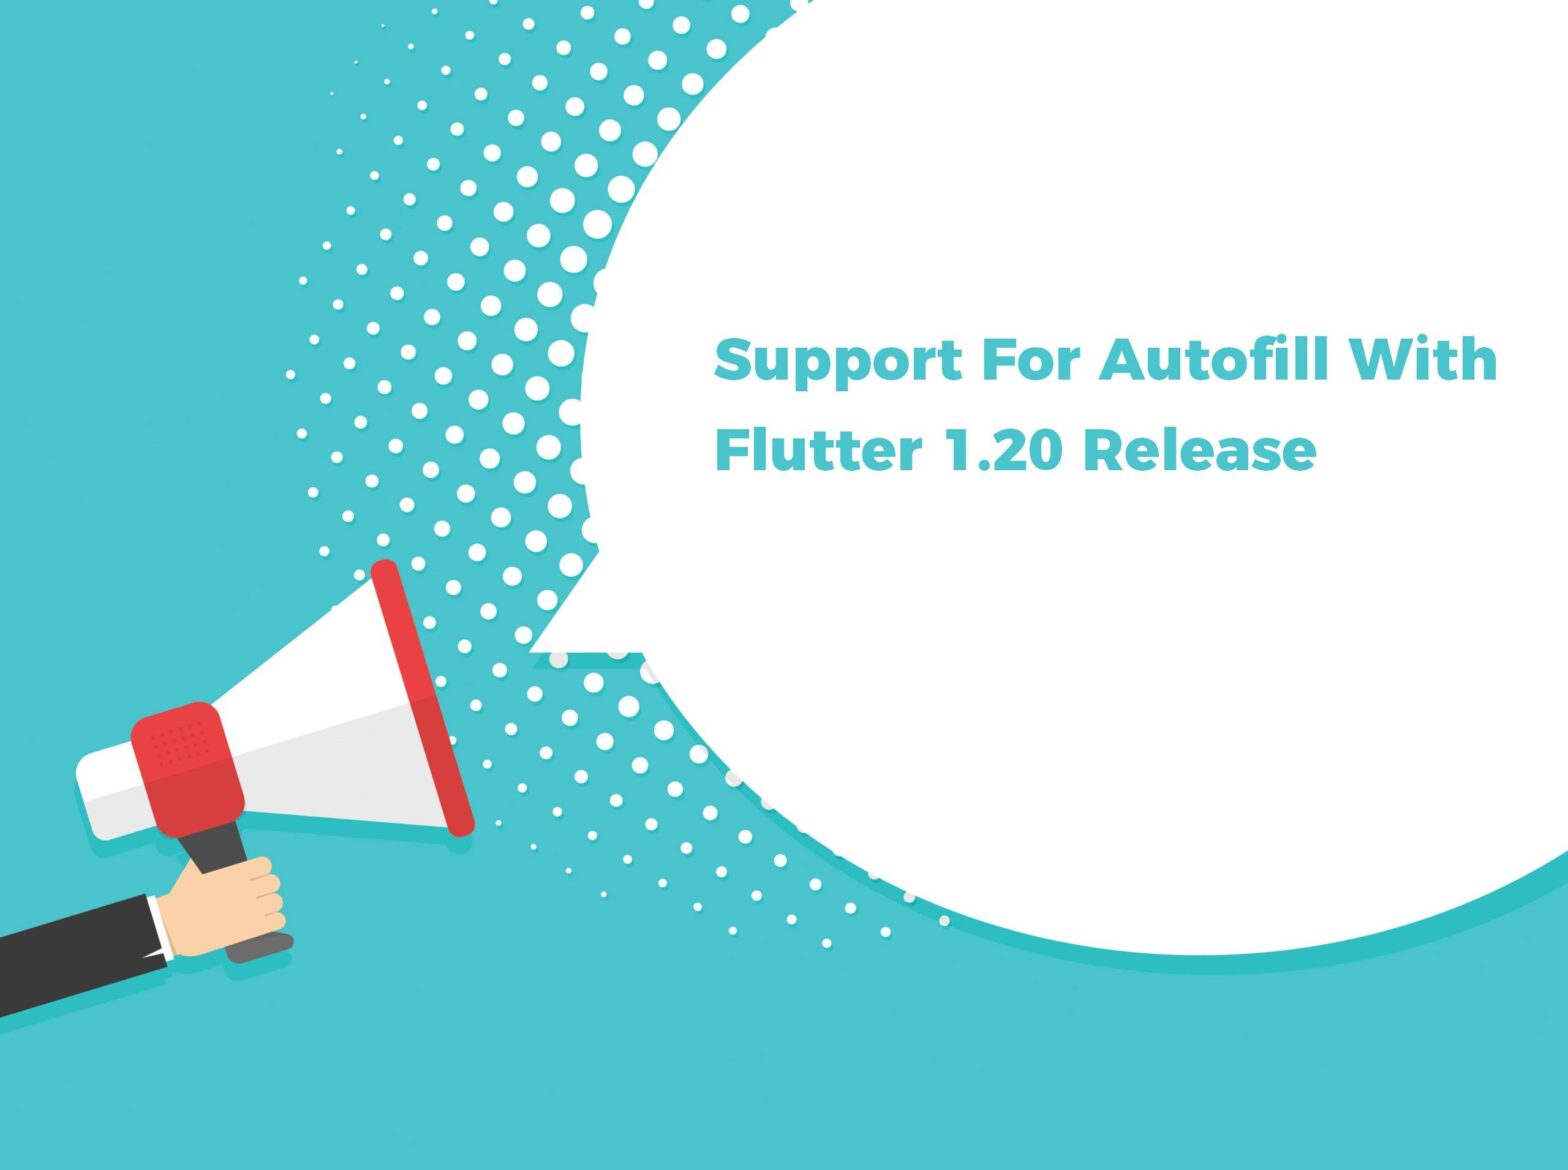 Support for Autofill with Flutter 1.20